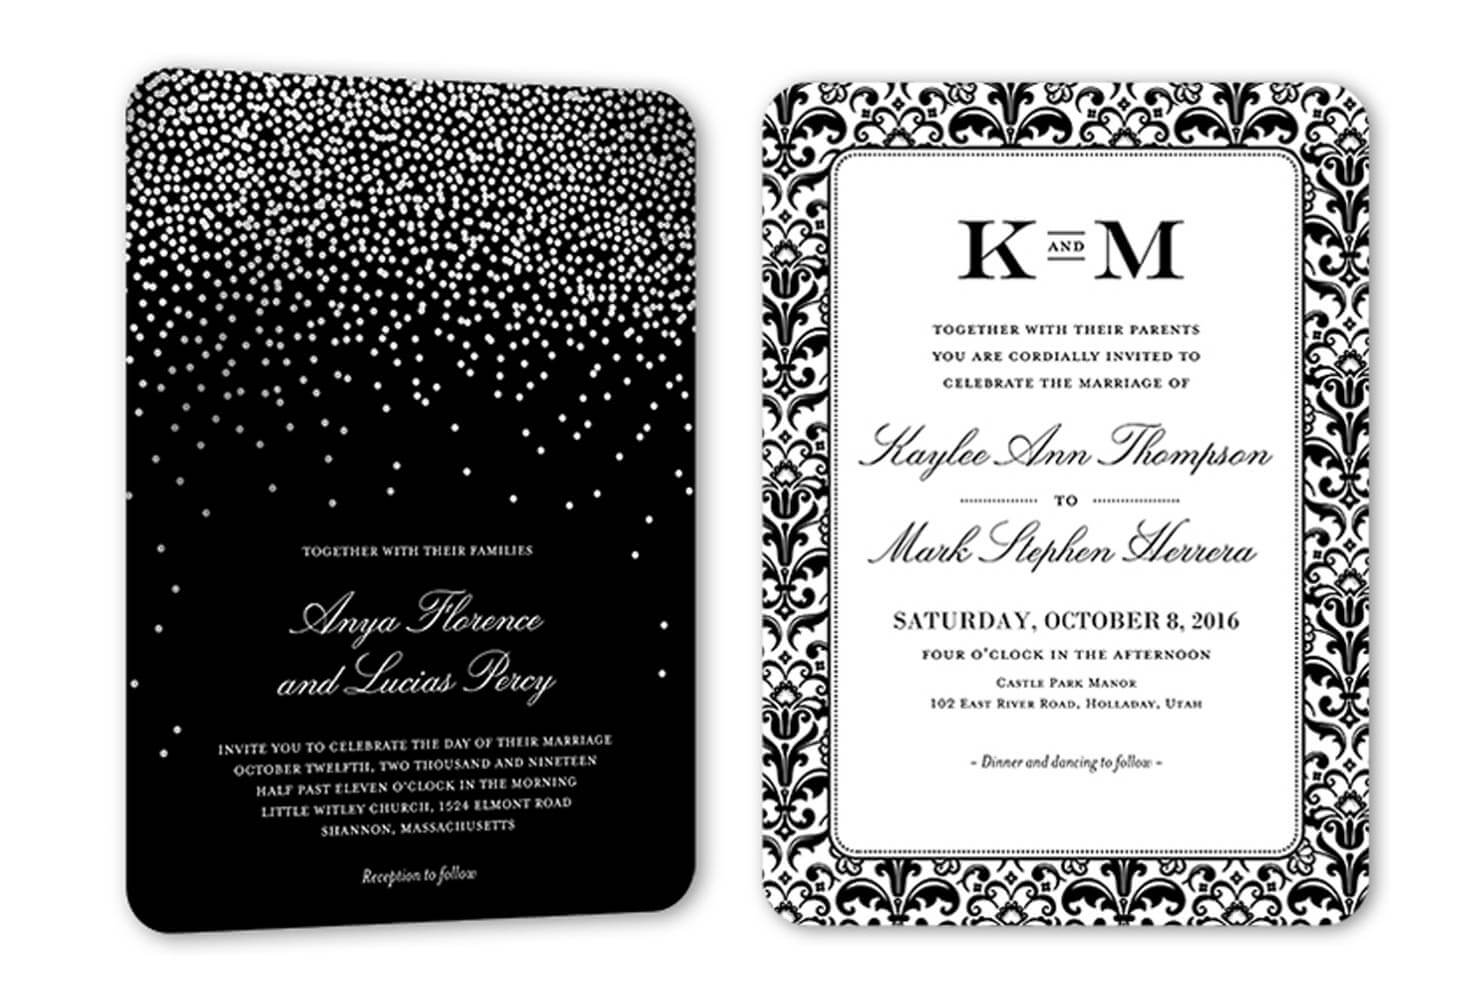 35+ Wedding Invitation Wording Examples 2020 | Shutterfly Within Free Dinner Invitation Templates For Word